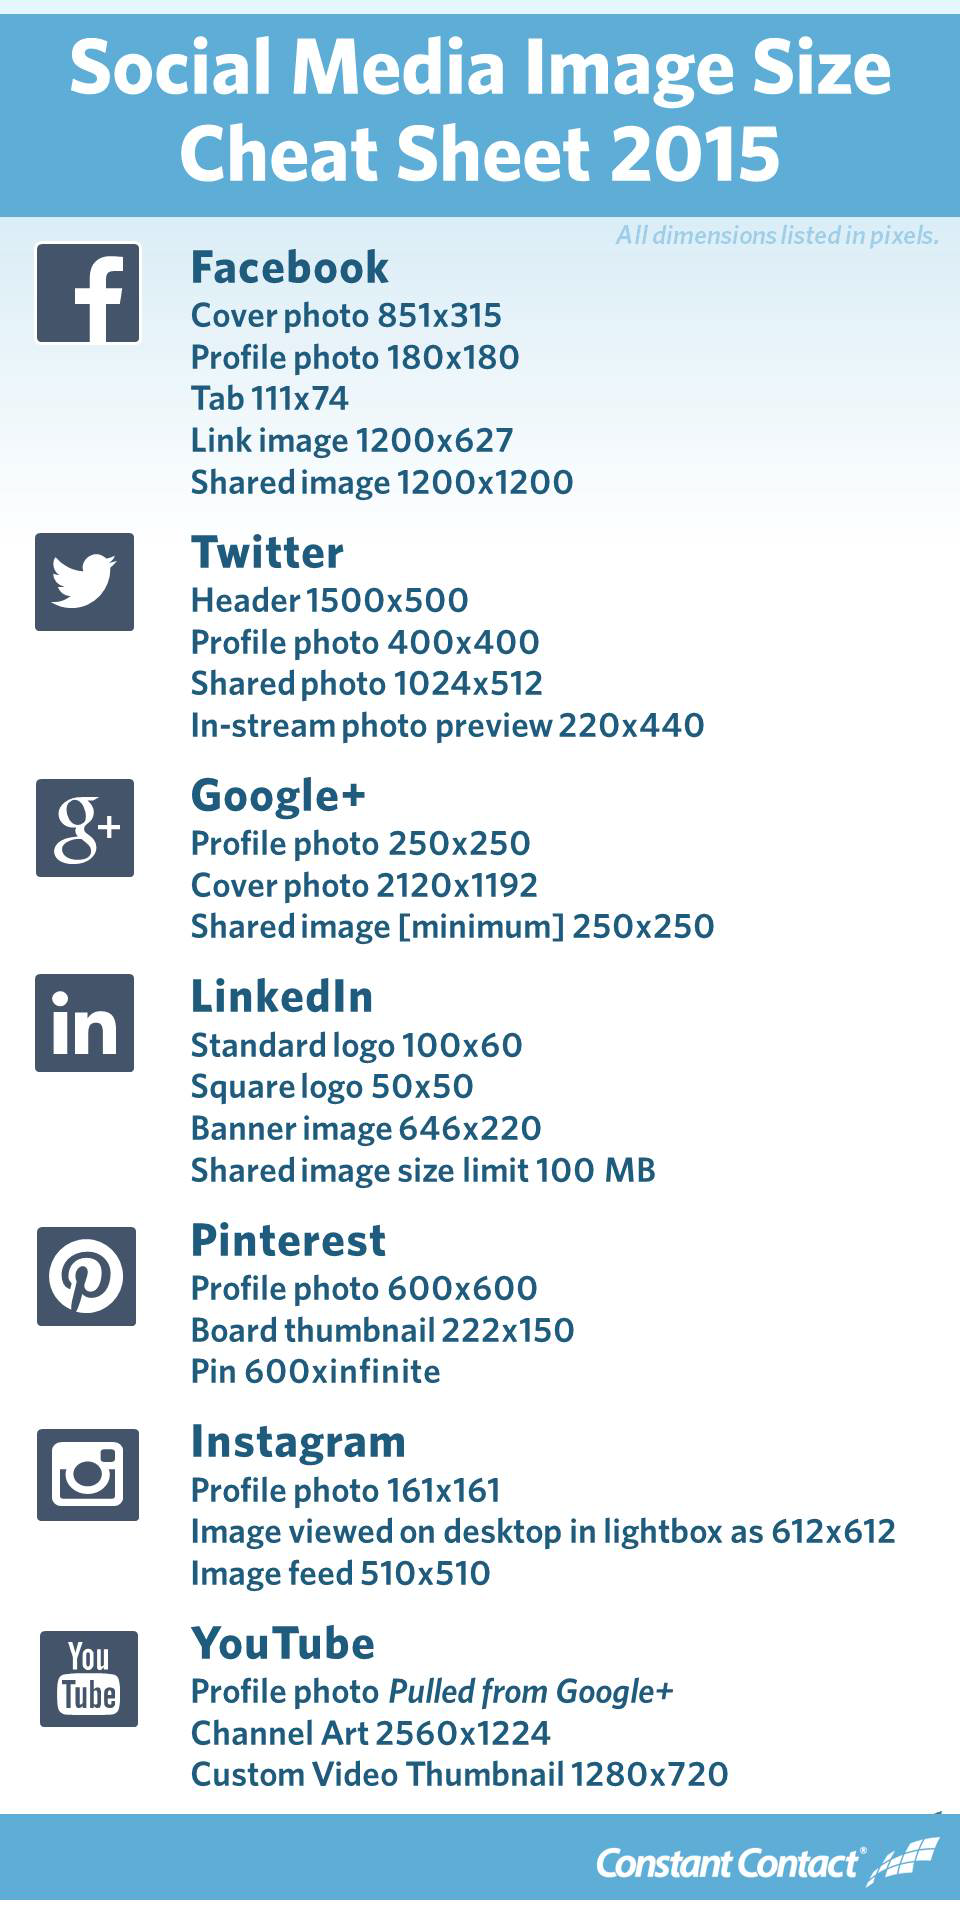 Infographic of social media image size cheat sheet 2015